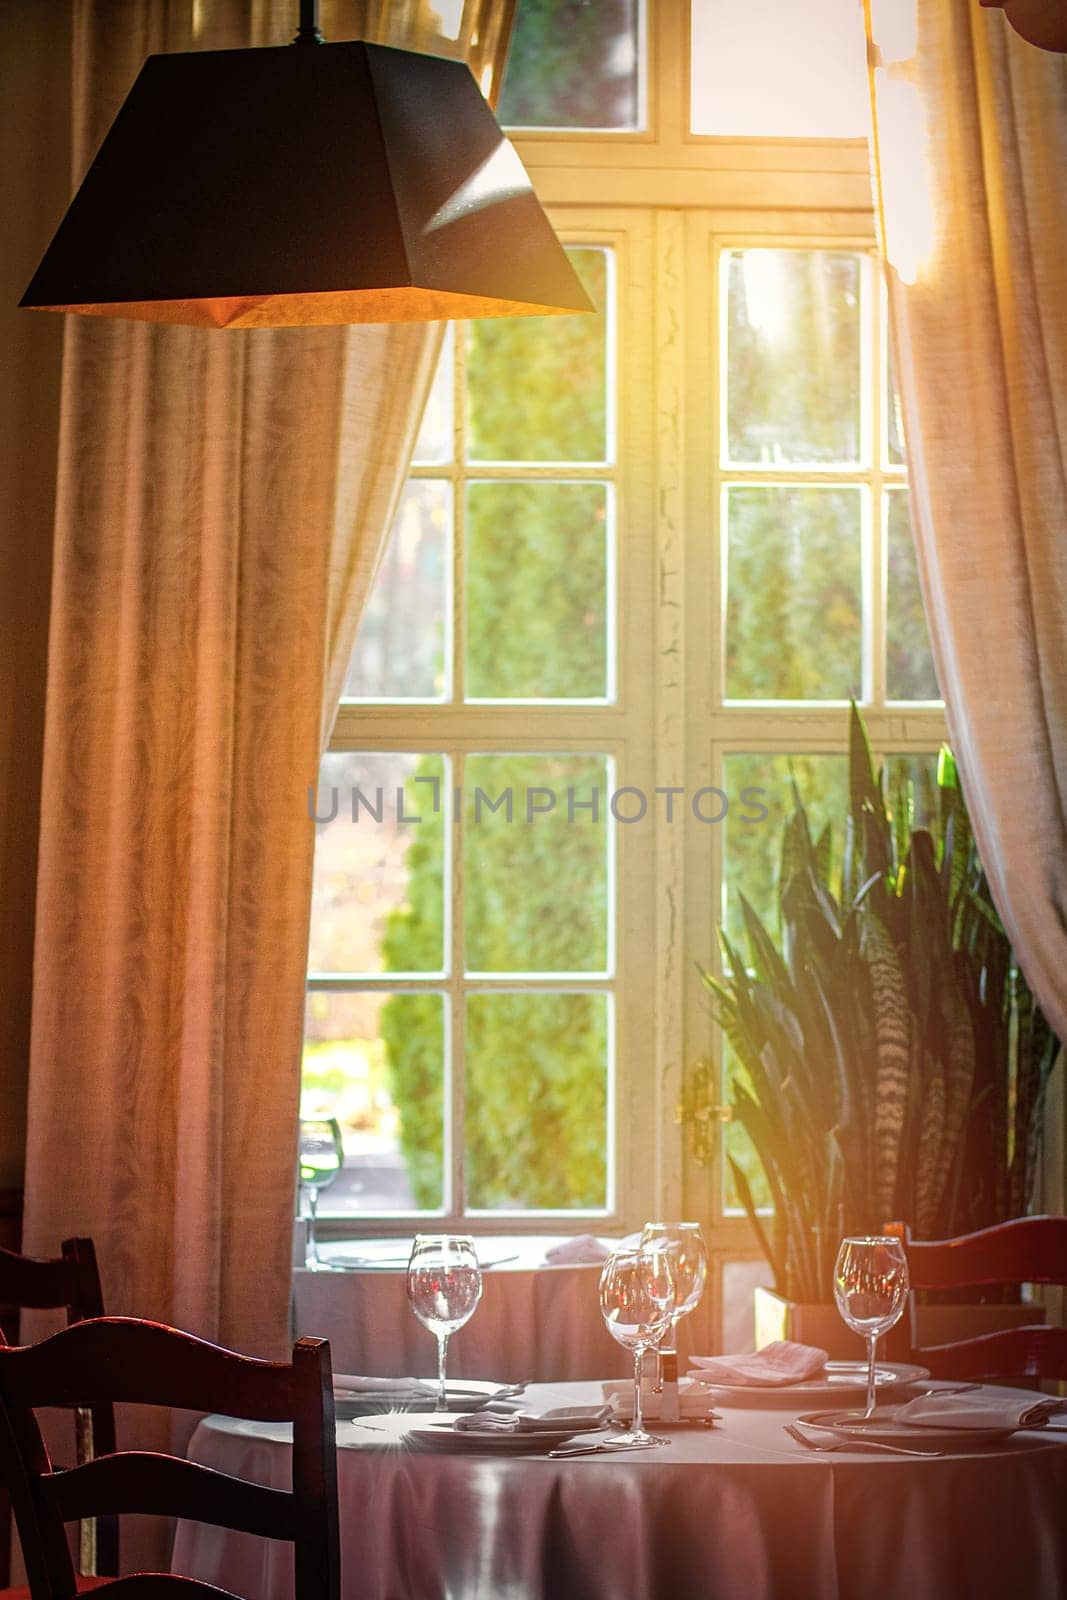 Dining table set with wine glasses by the window in a luxury restaurant interior by hotel by Rom4ek